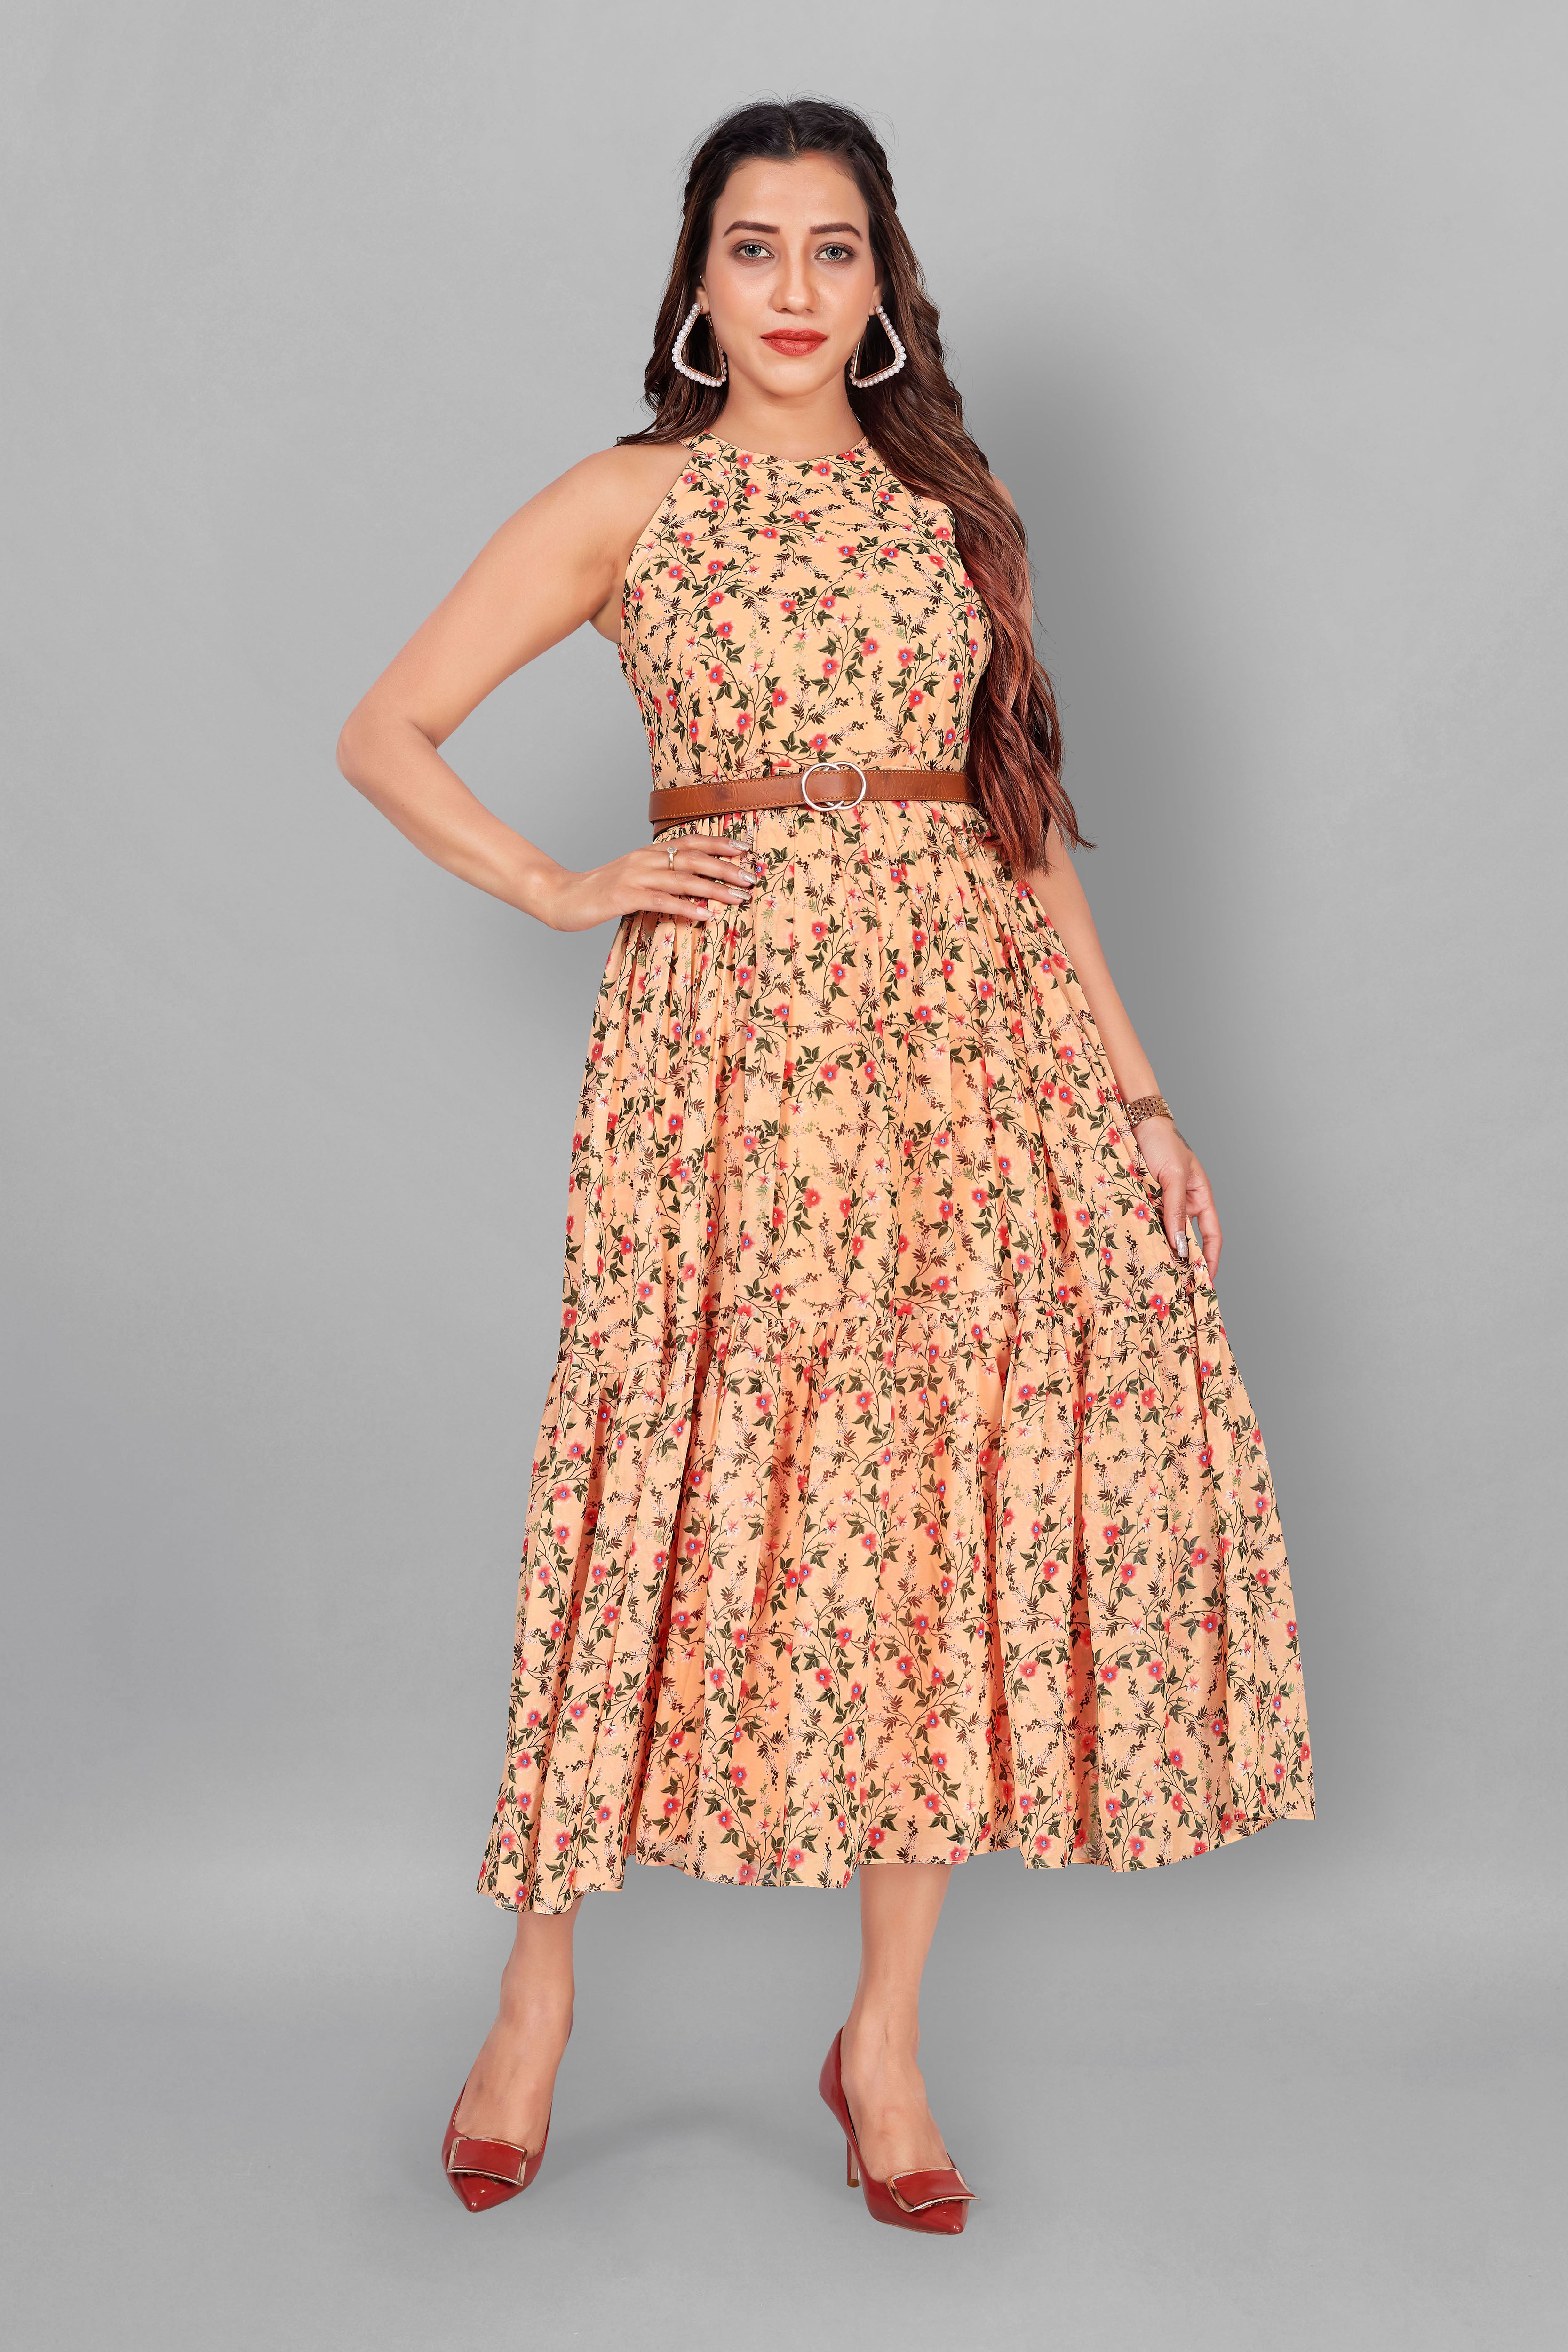 Details more than 82 two piece dress myntra best